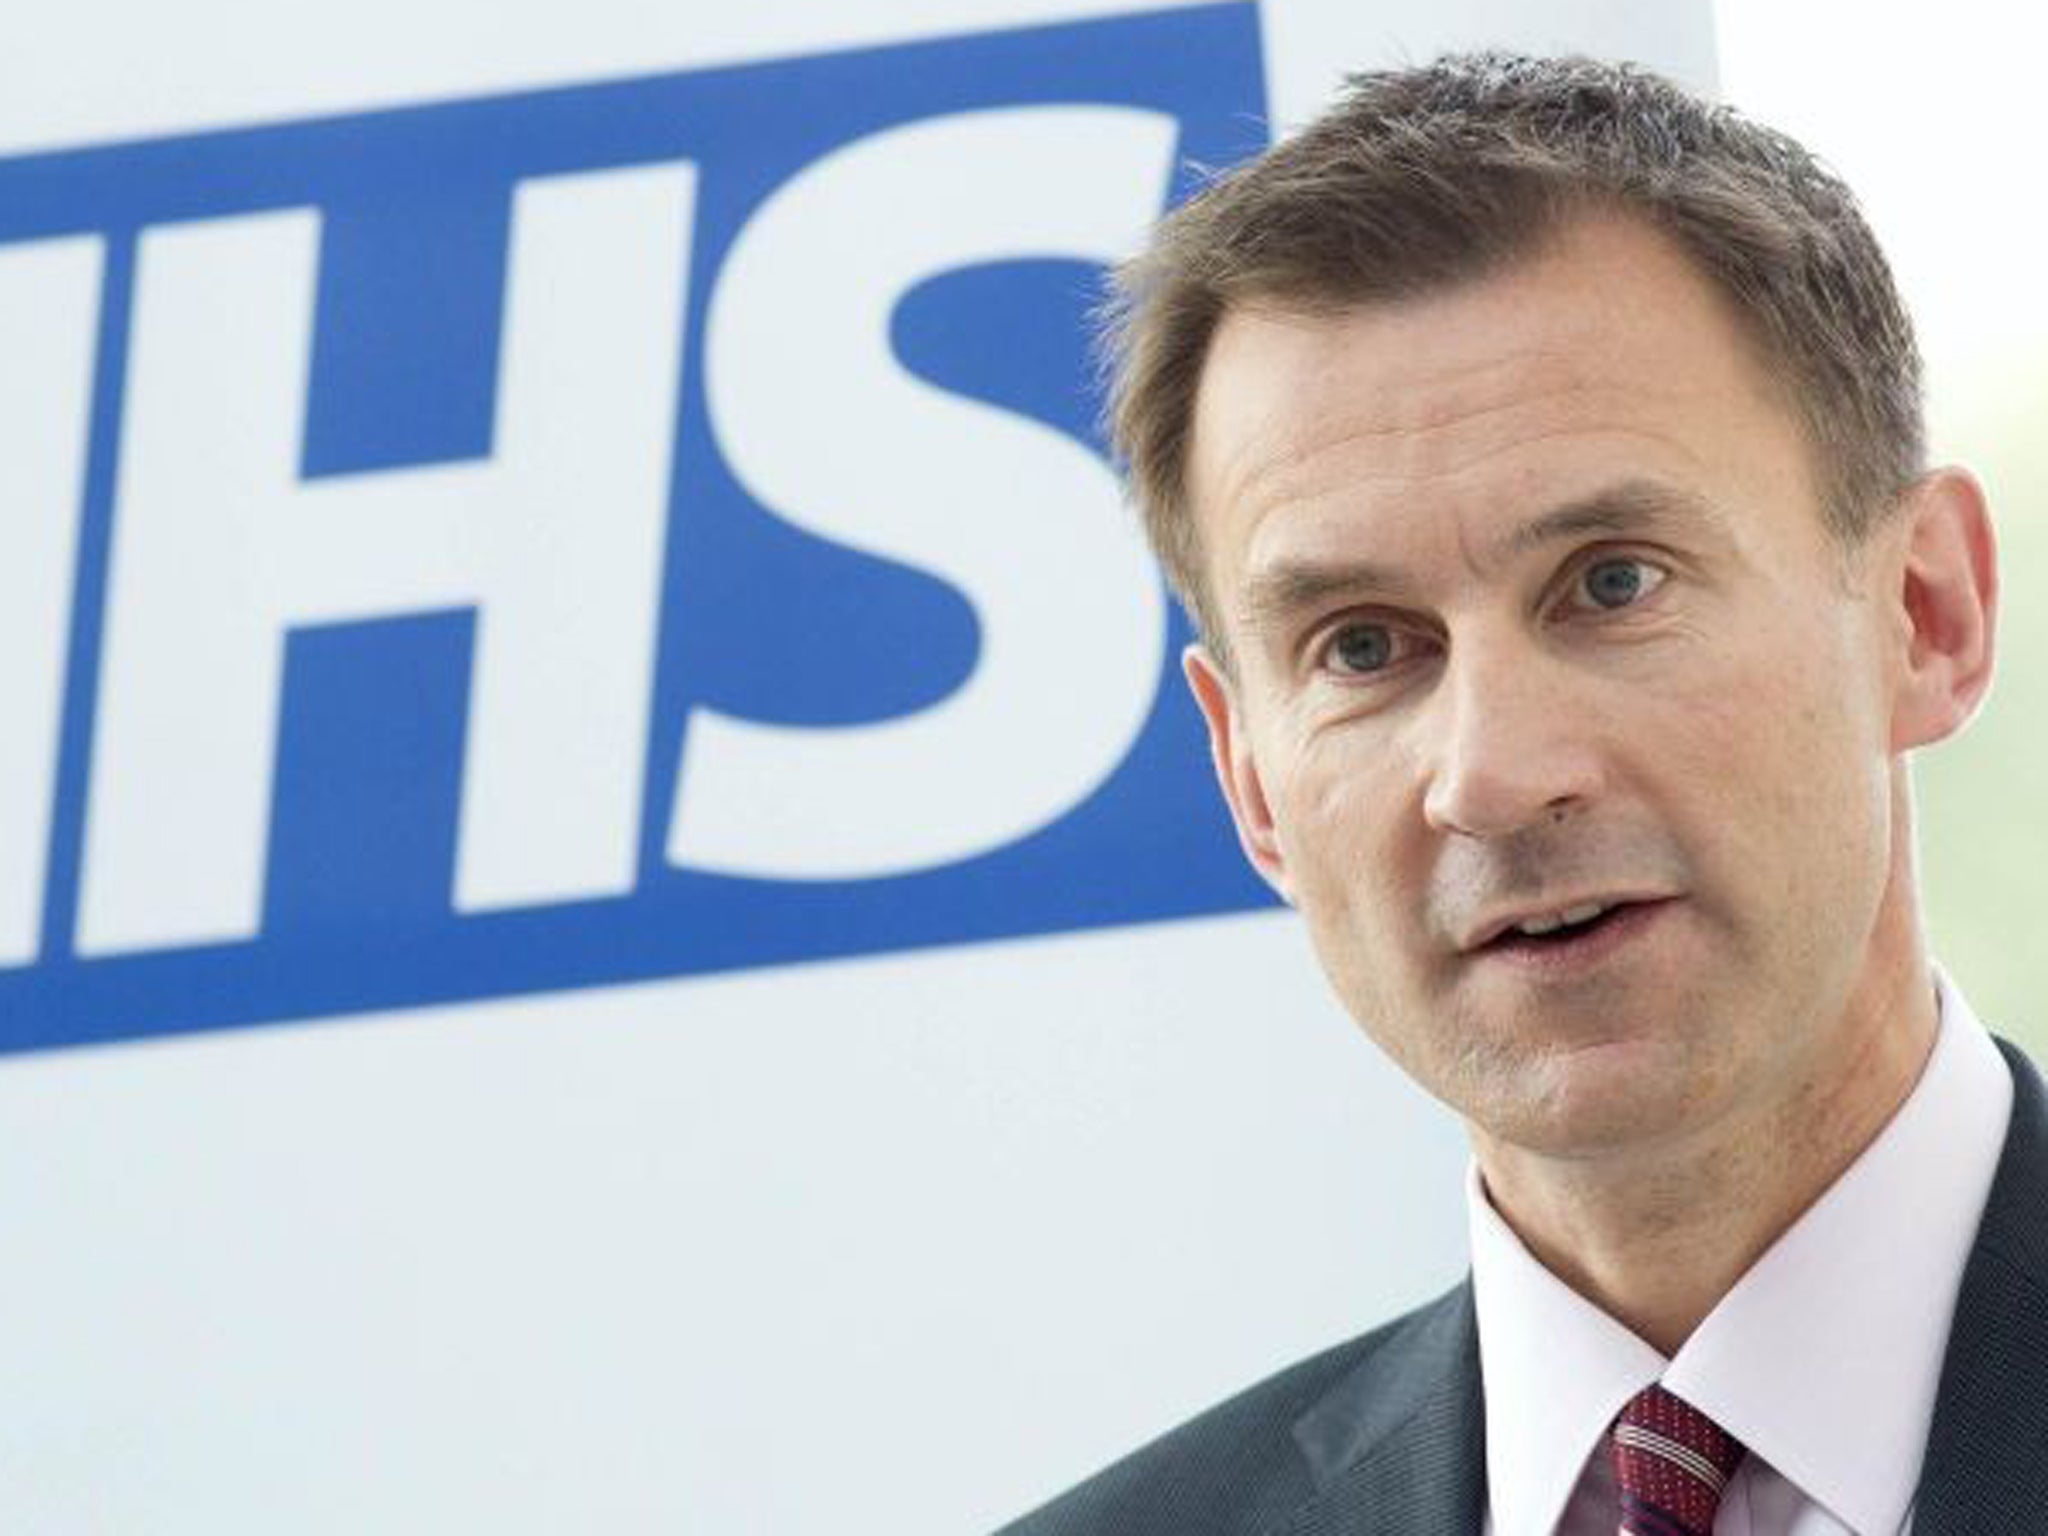 Jeremy Hunt announced strict new rules designed to clamp down on what he calls staffing agencies 'ripping off the NHS'